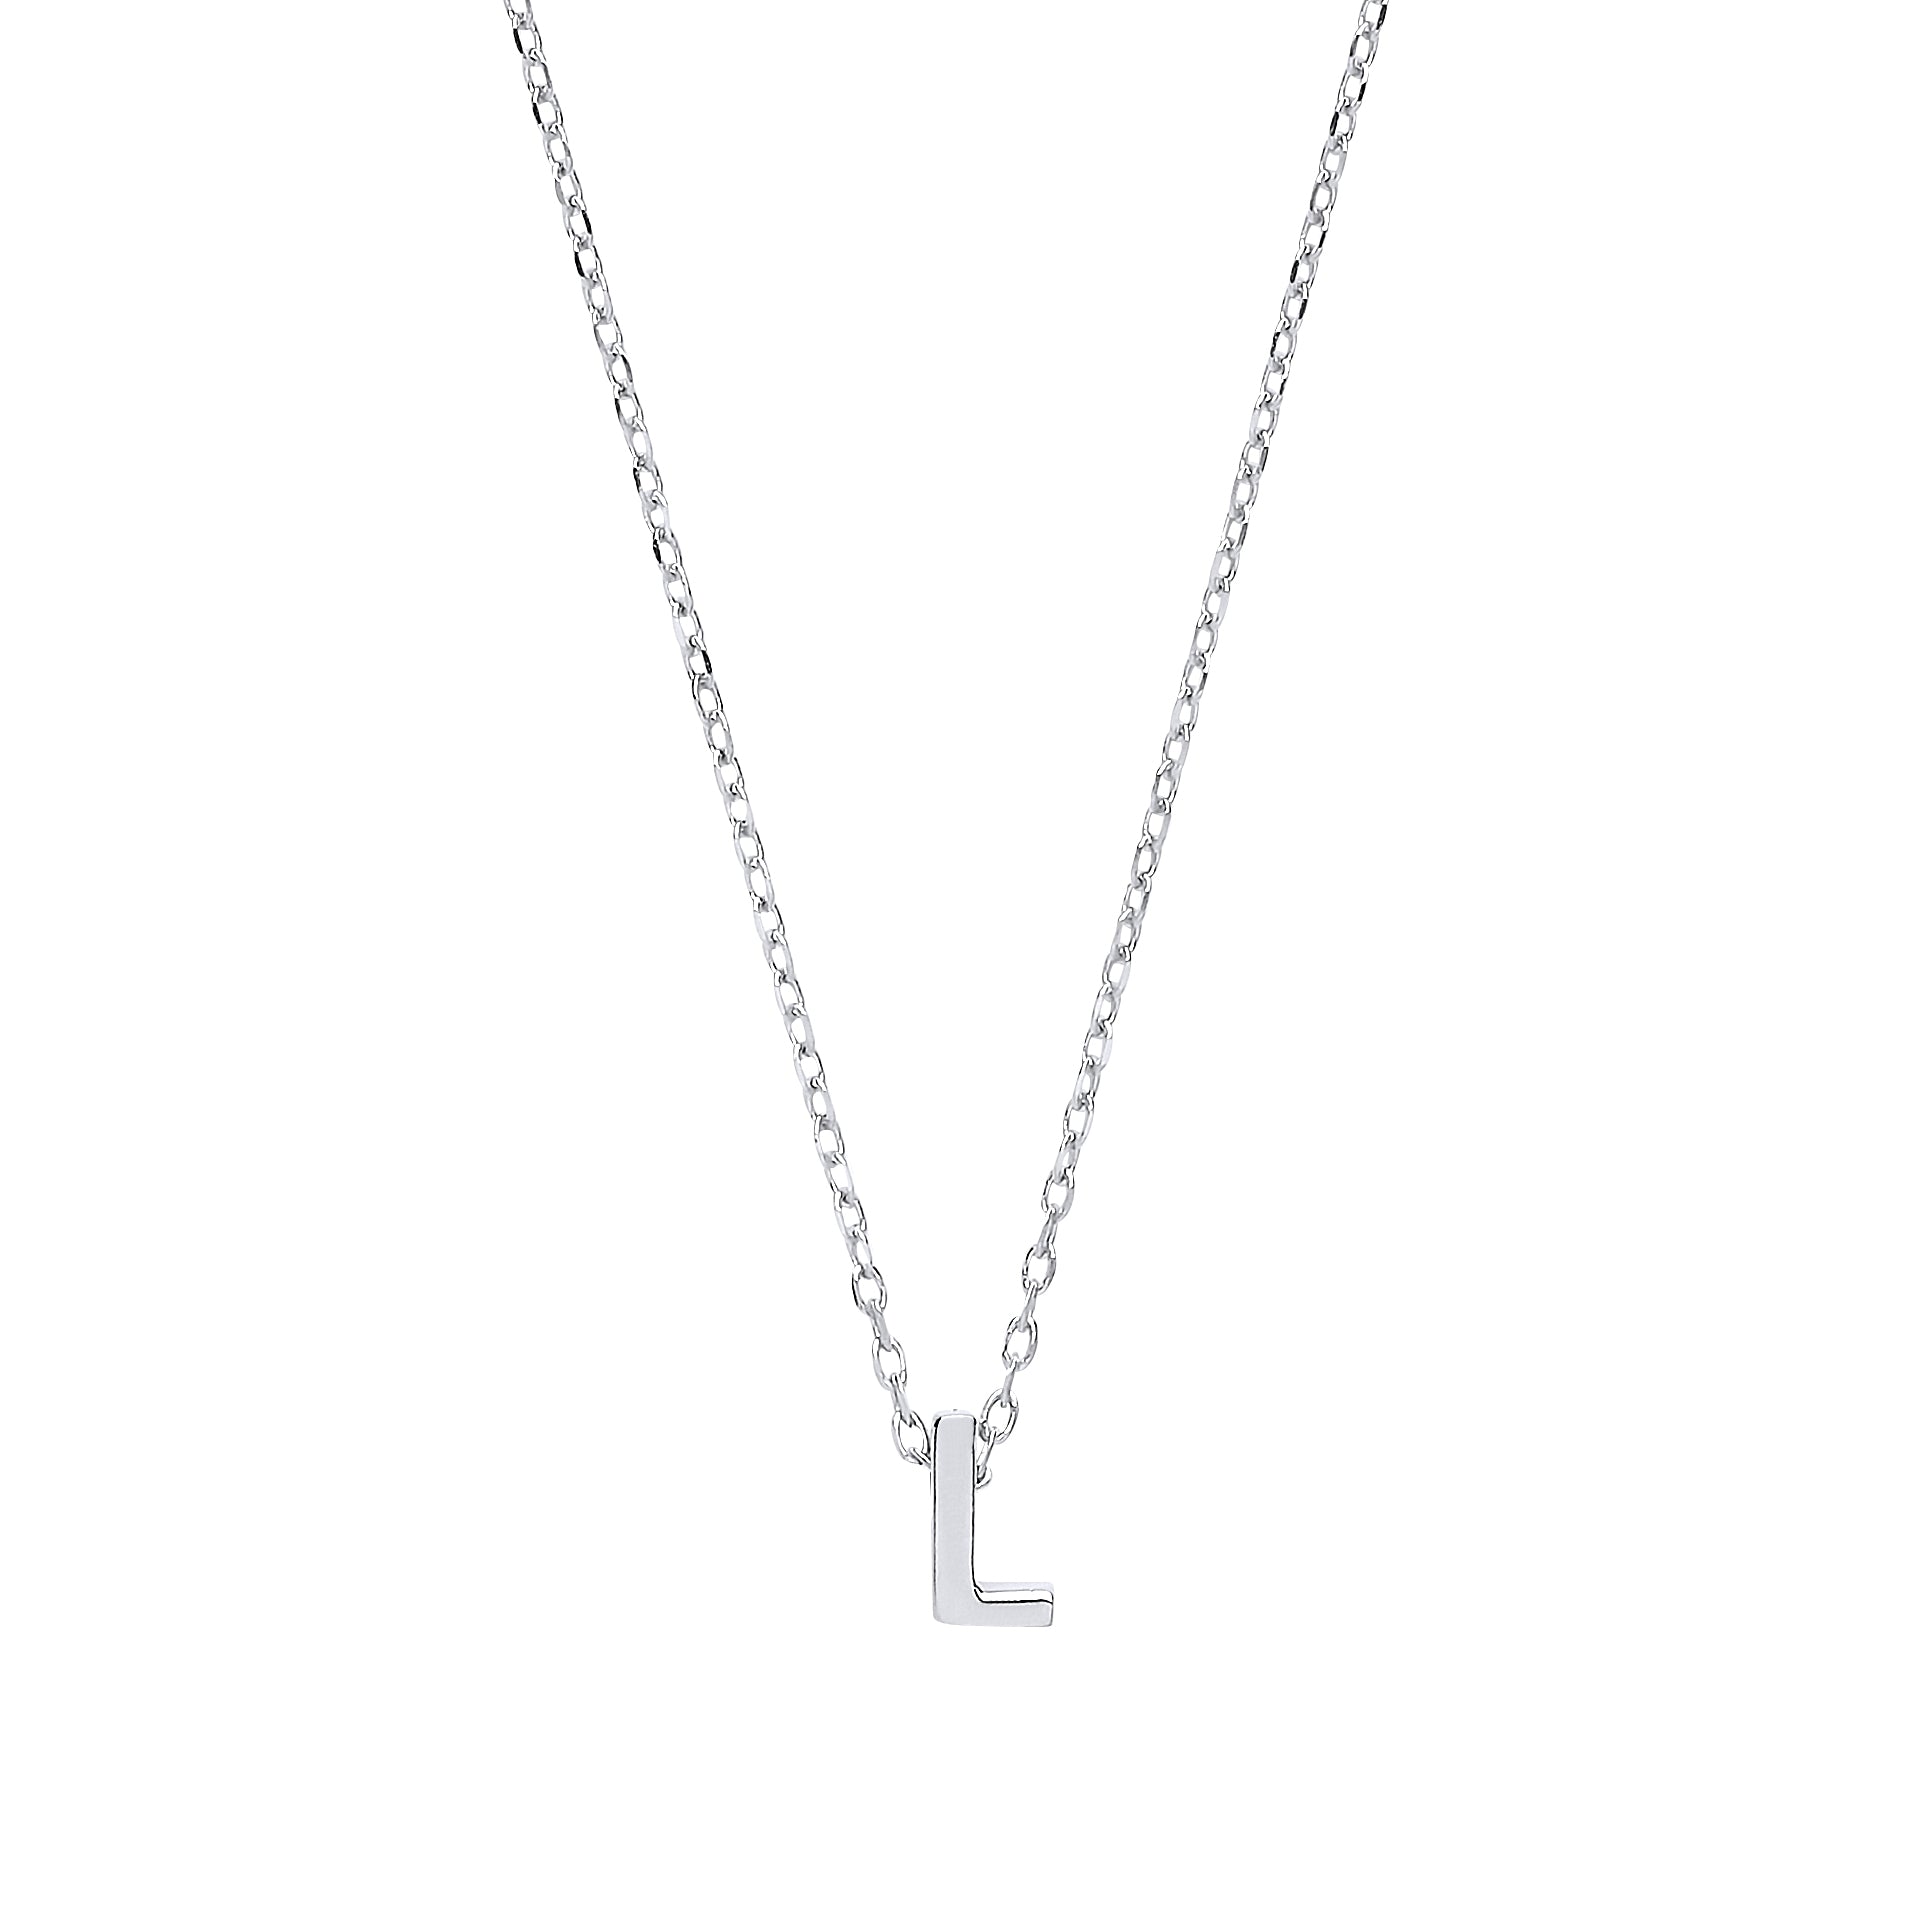 Silver  Letter L Initial Pendant Necklace 18 inch - GIN4L